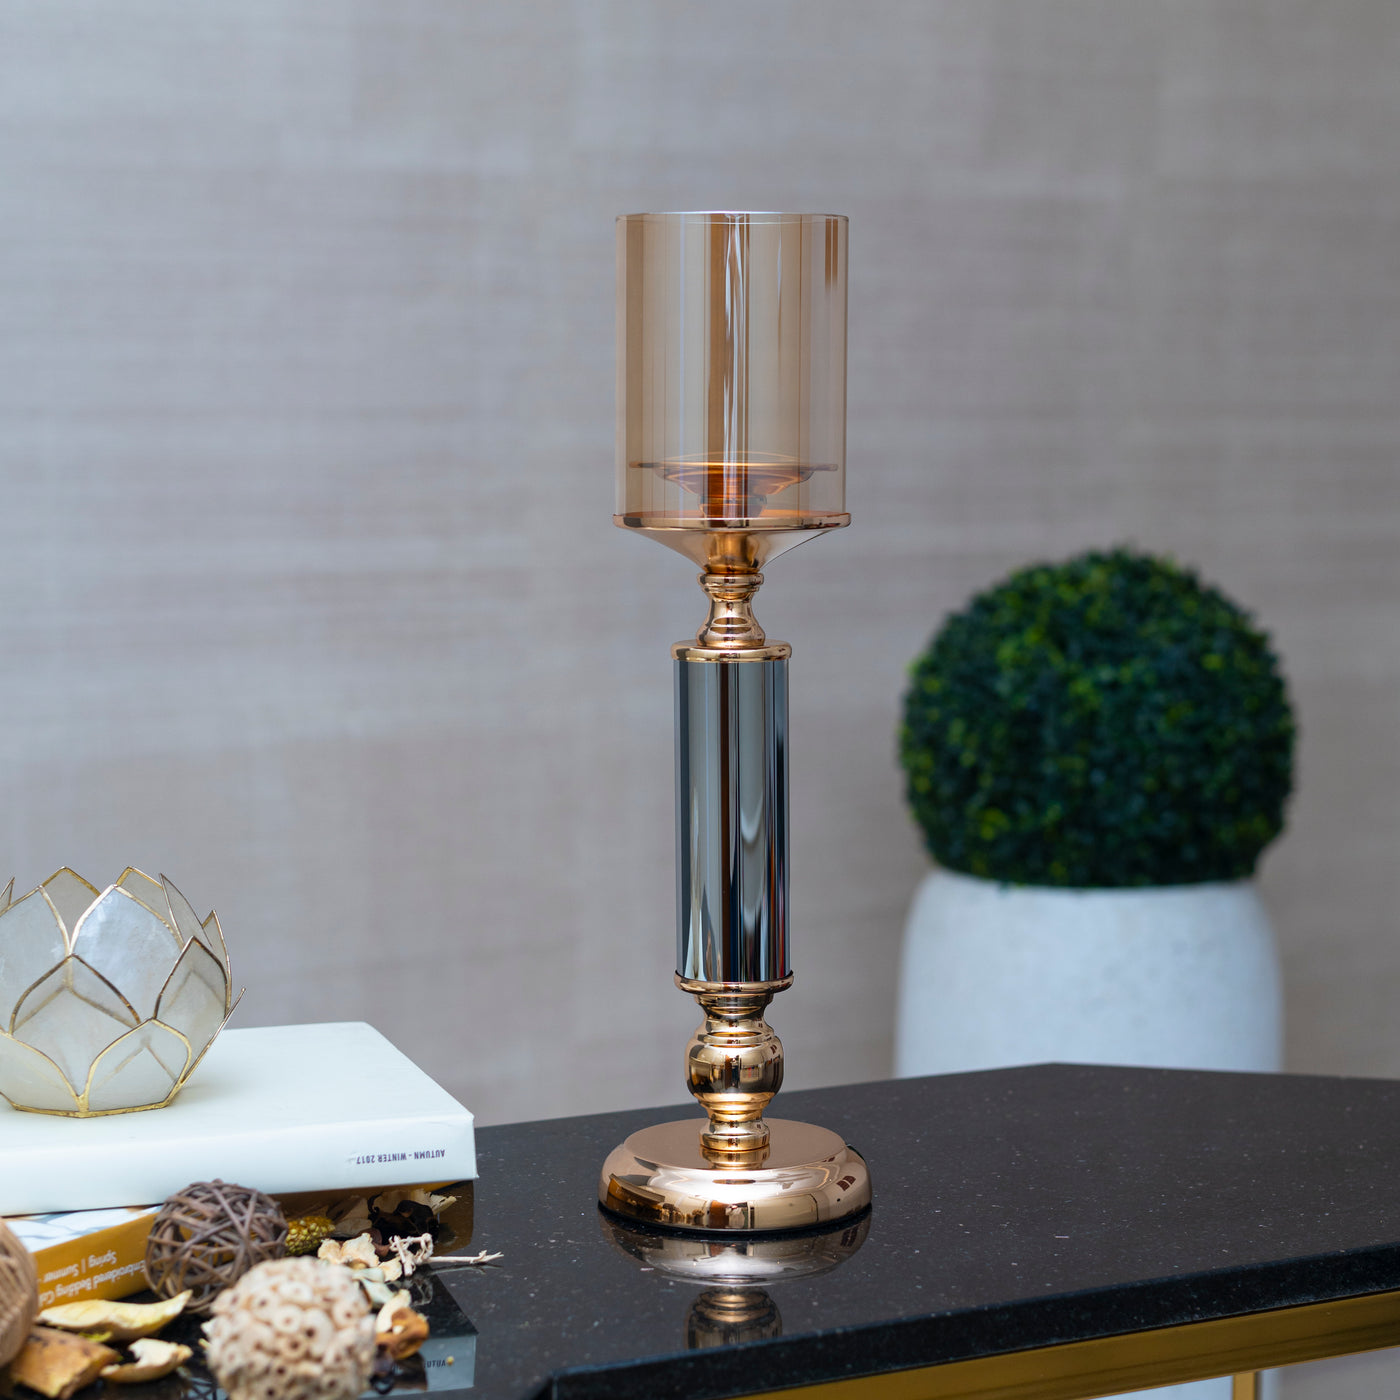 Ornamental luxury candle stands by Home 360